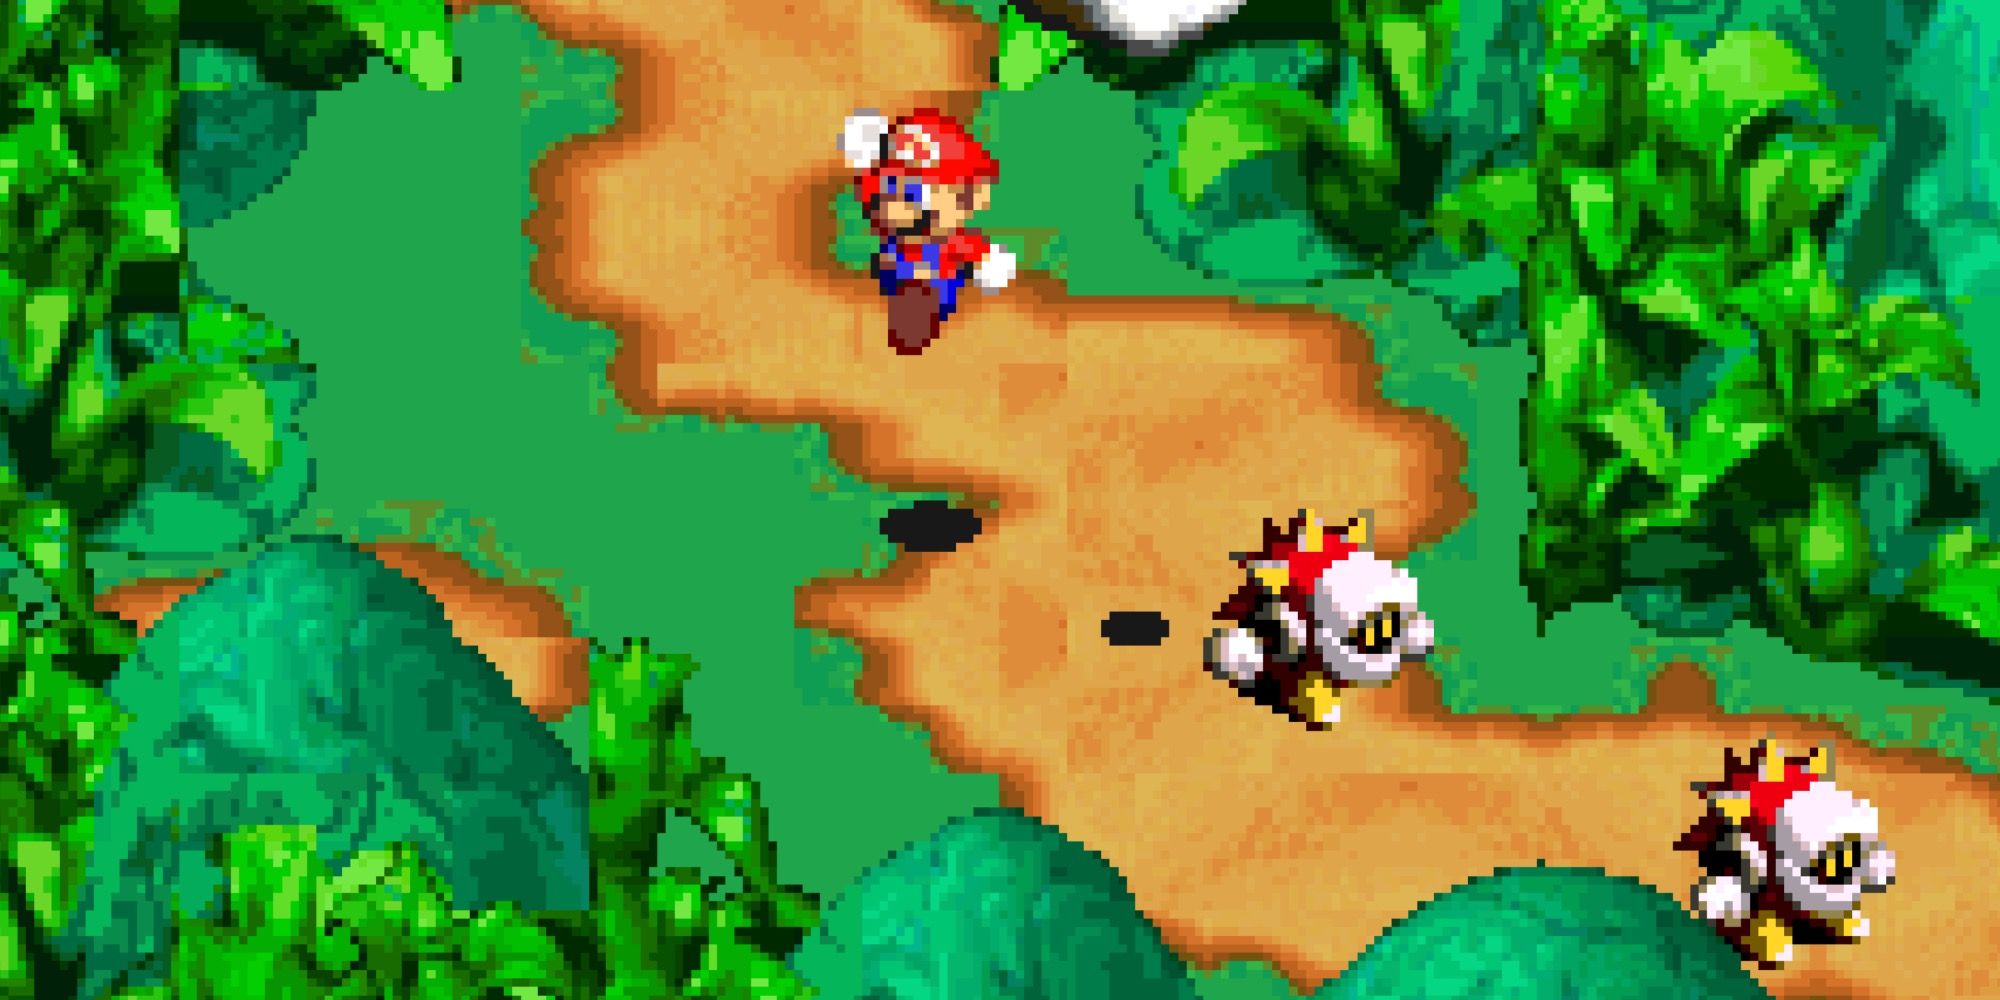 Exploring the world in Super Mario RPG Legend of the Seven Stars